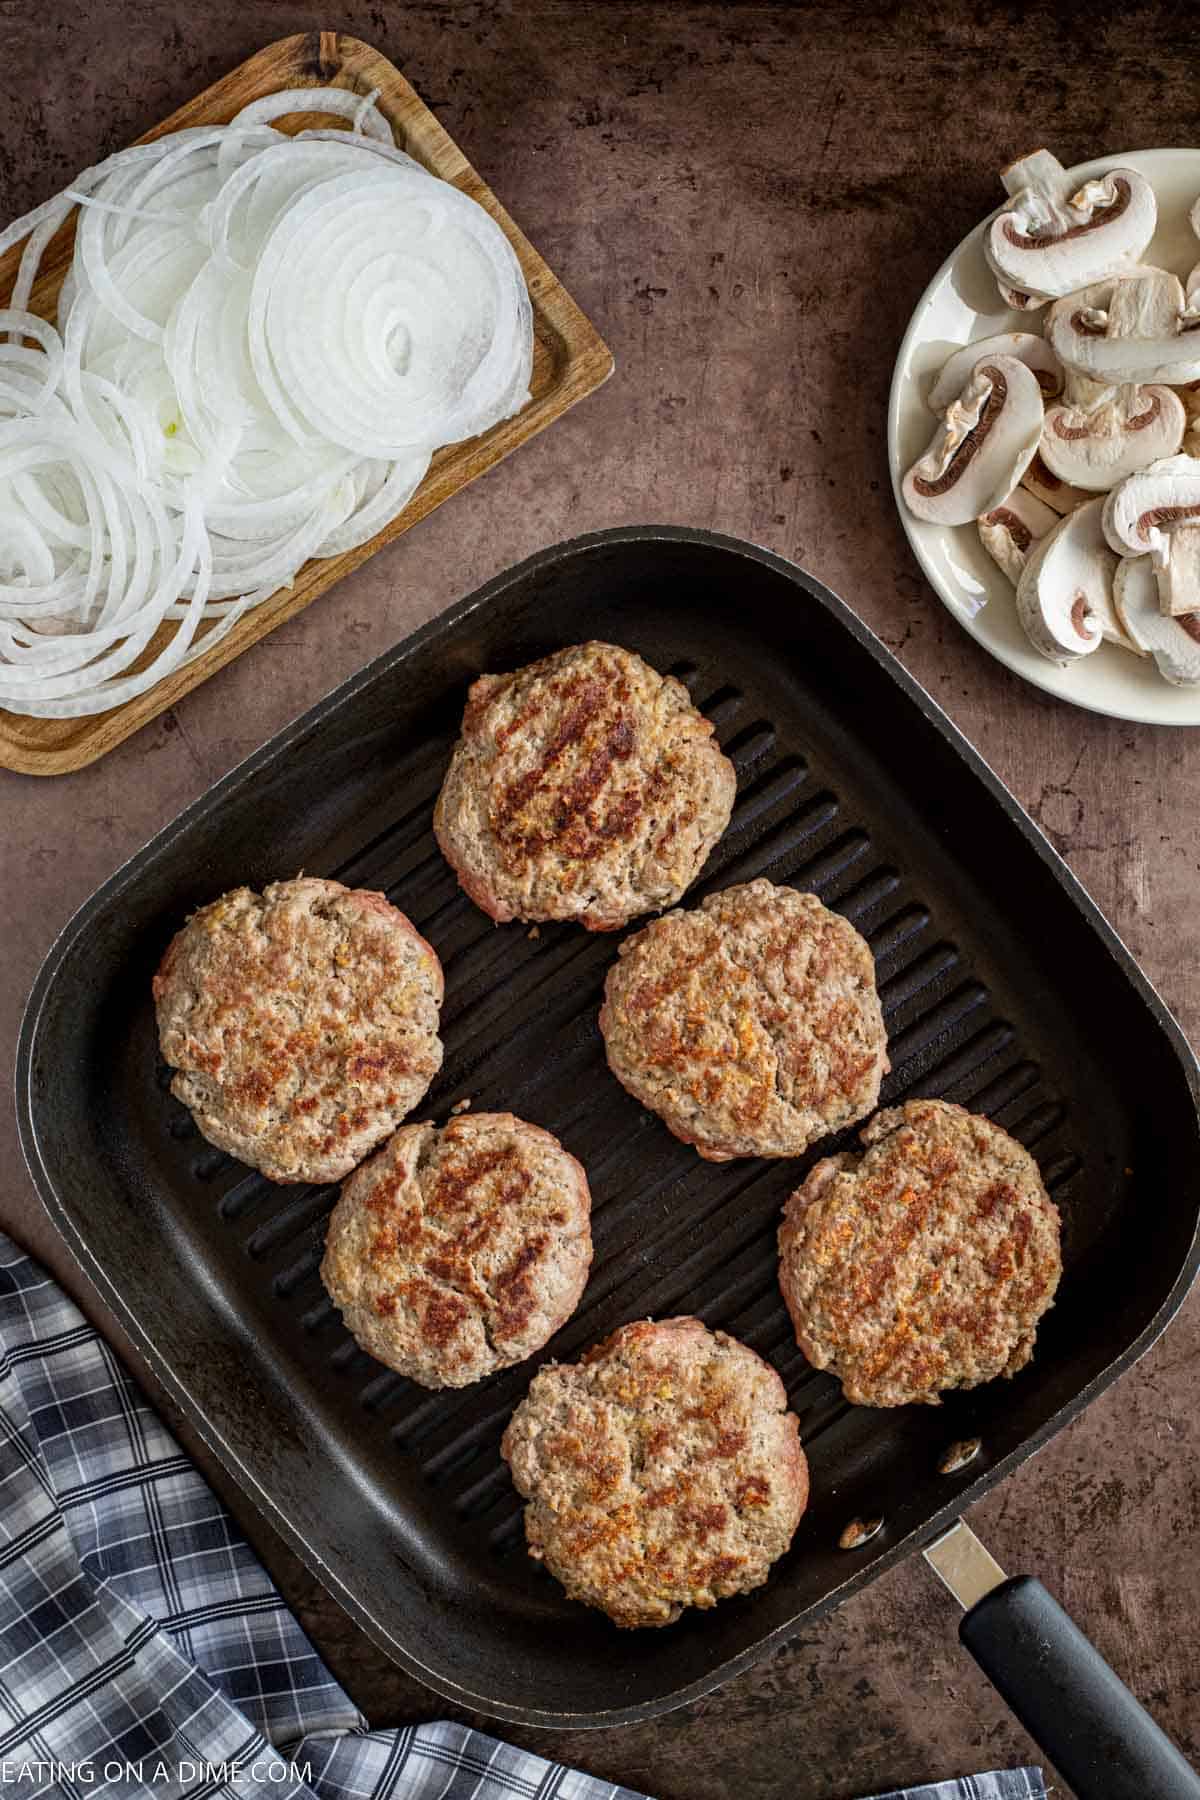 Cooking the beef patties in a skillet